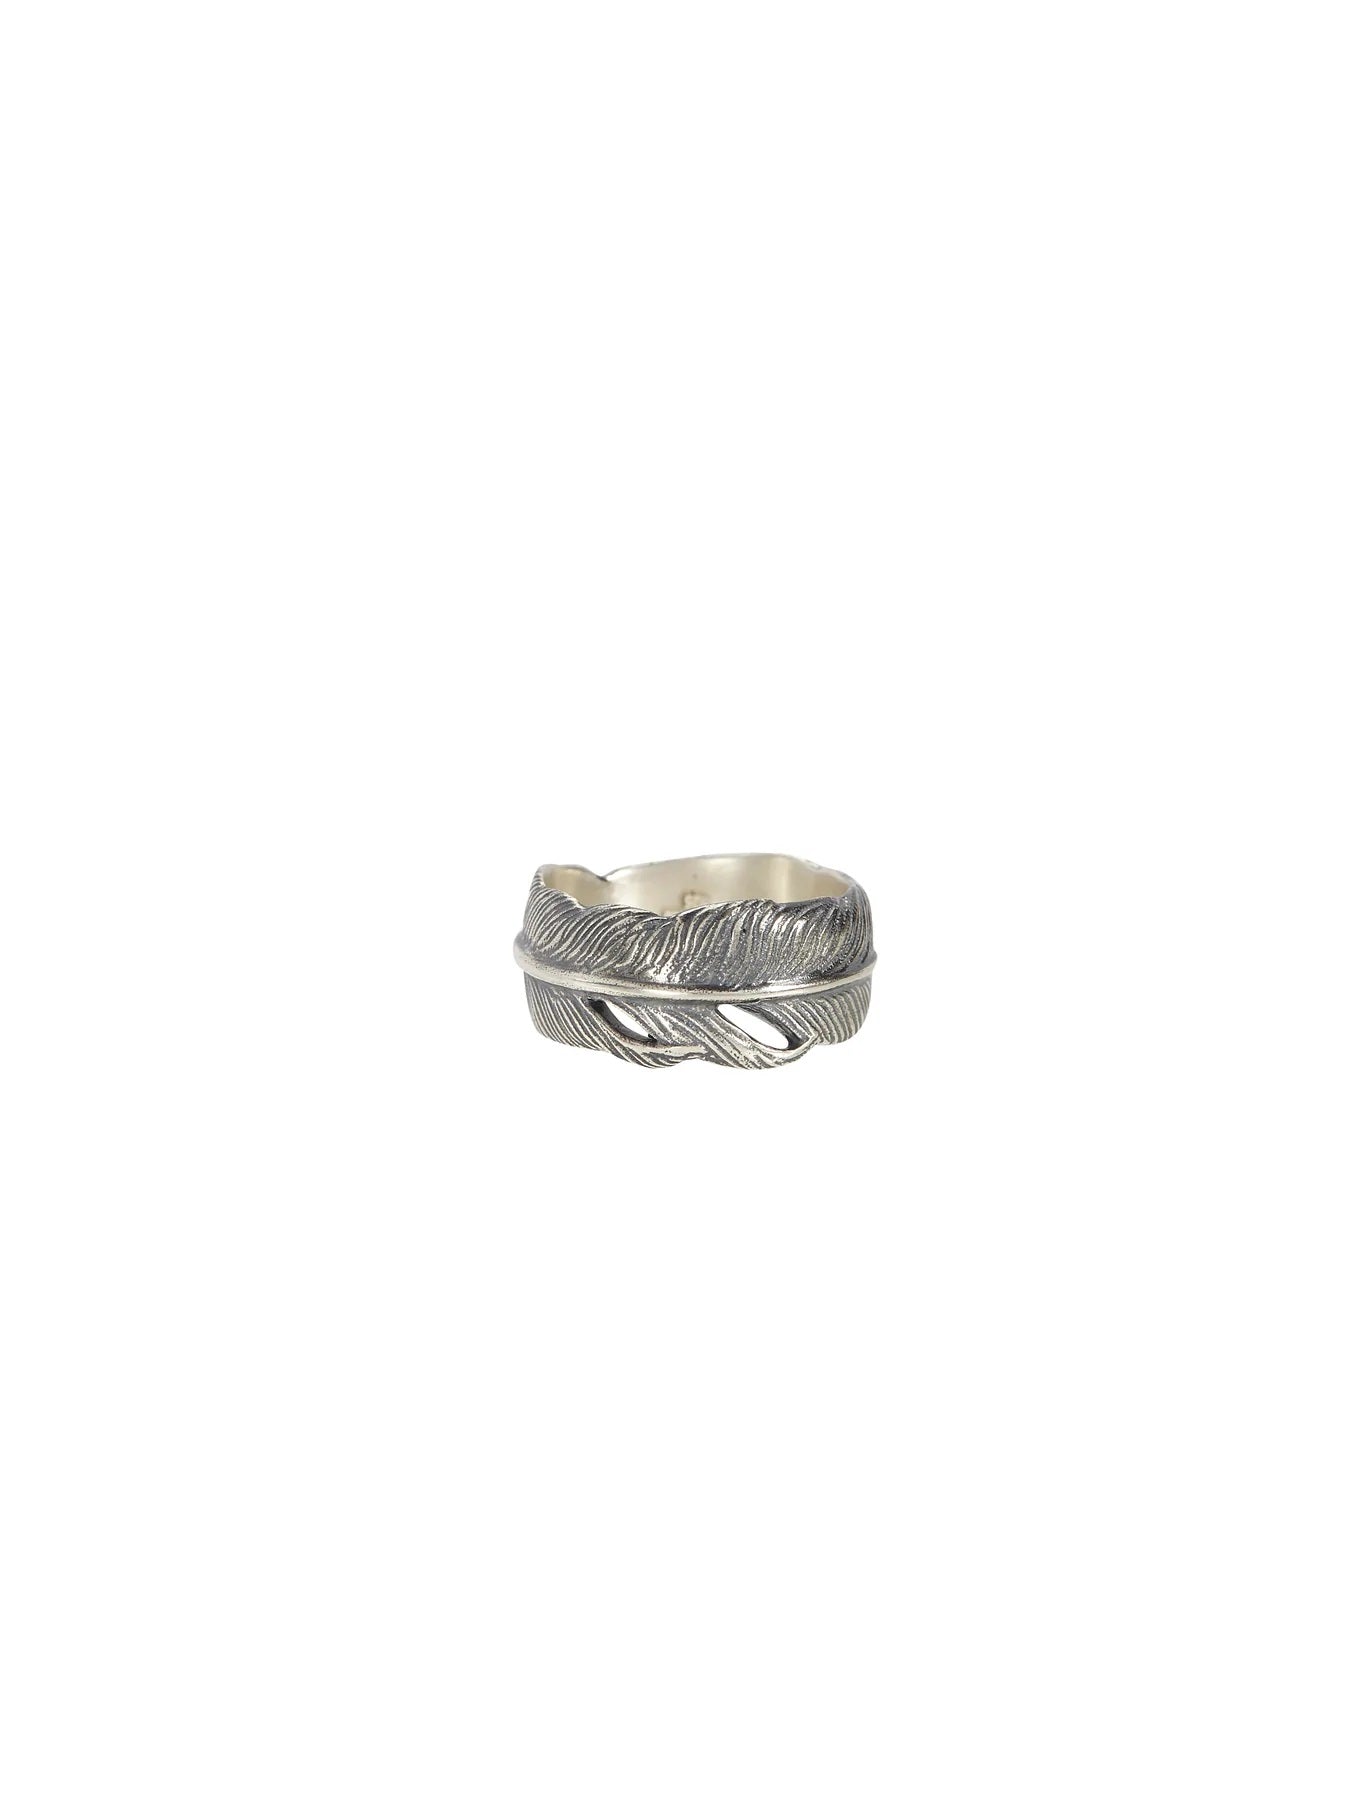 RAVEN STERLING SILVER BAND RING, FEATHER, WITH NO STONE